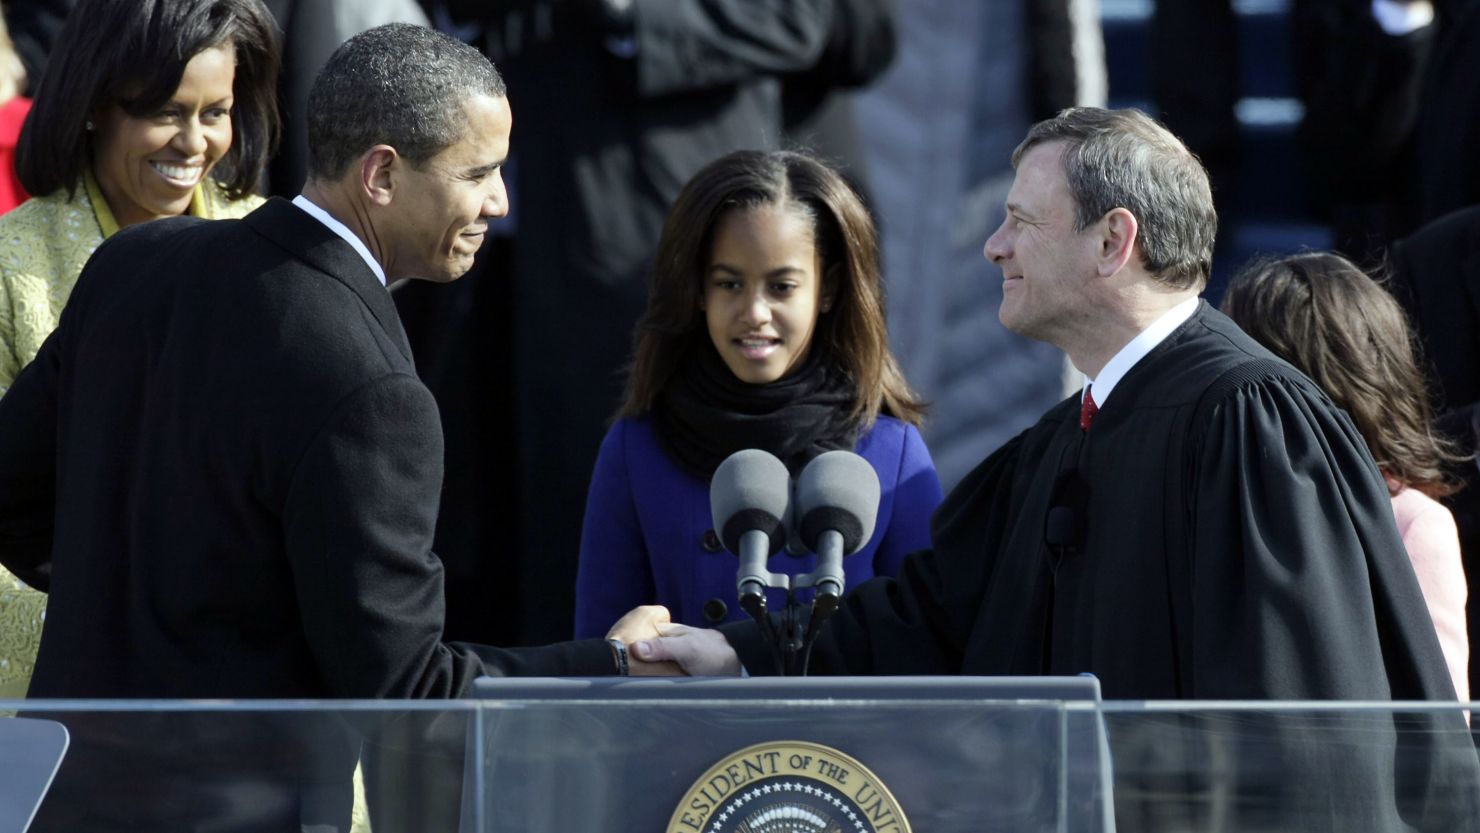 President Obama, who was sworn in by Chief Justice John Roberts, may be pitted against him over healthcare.